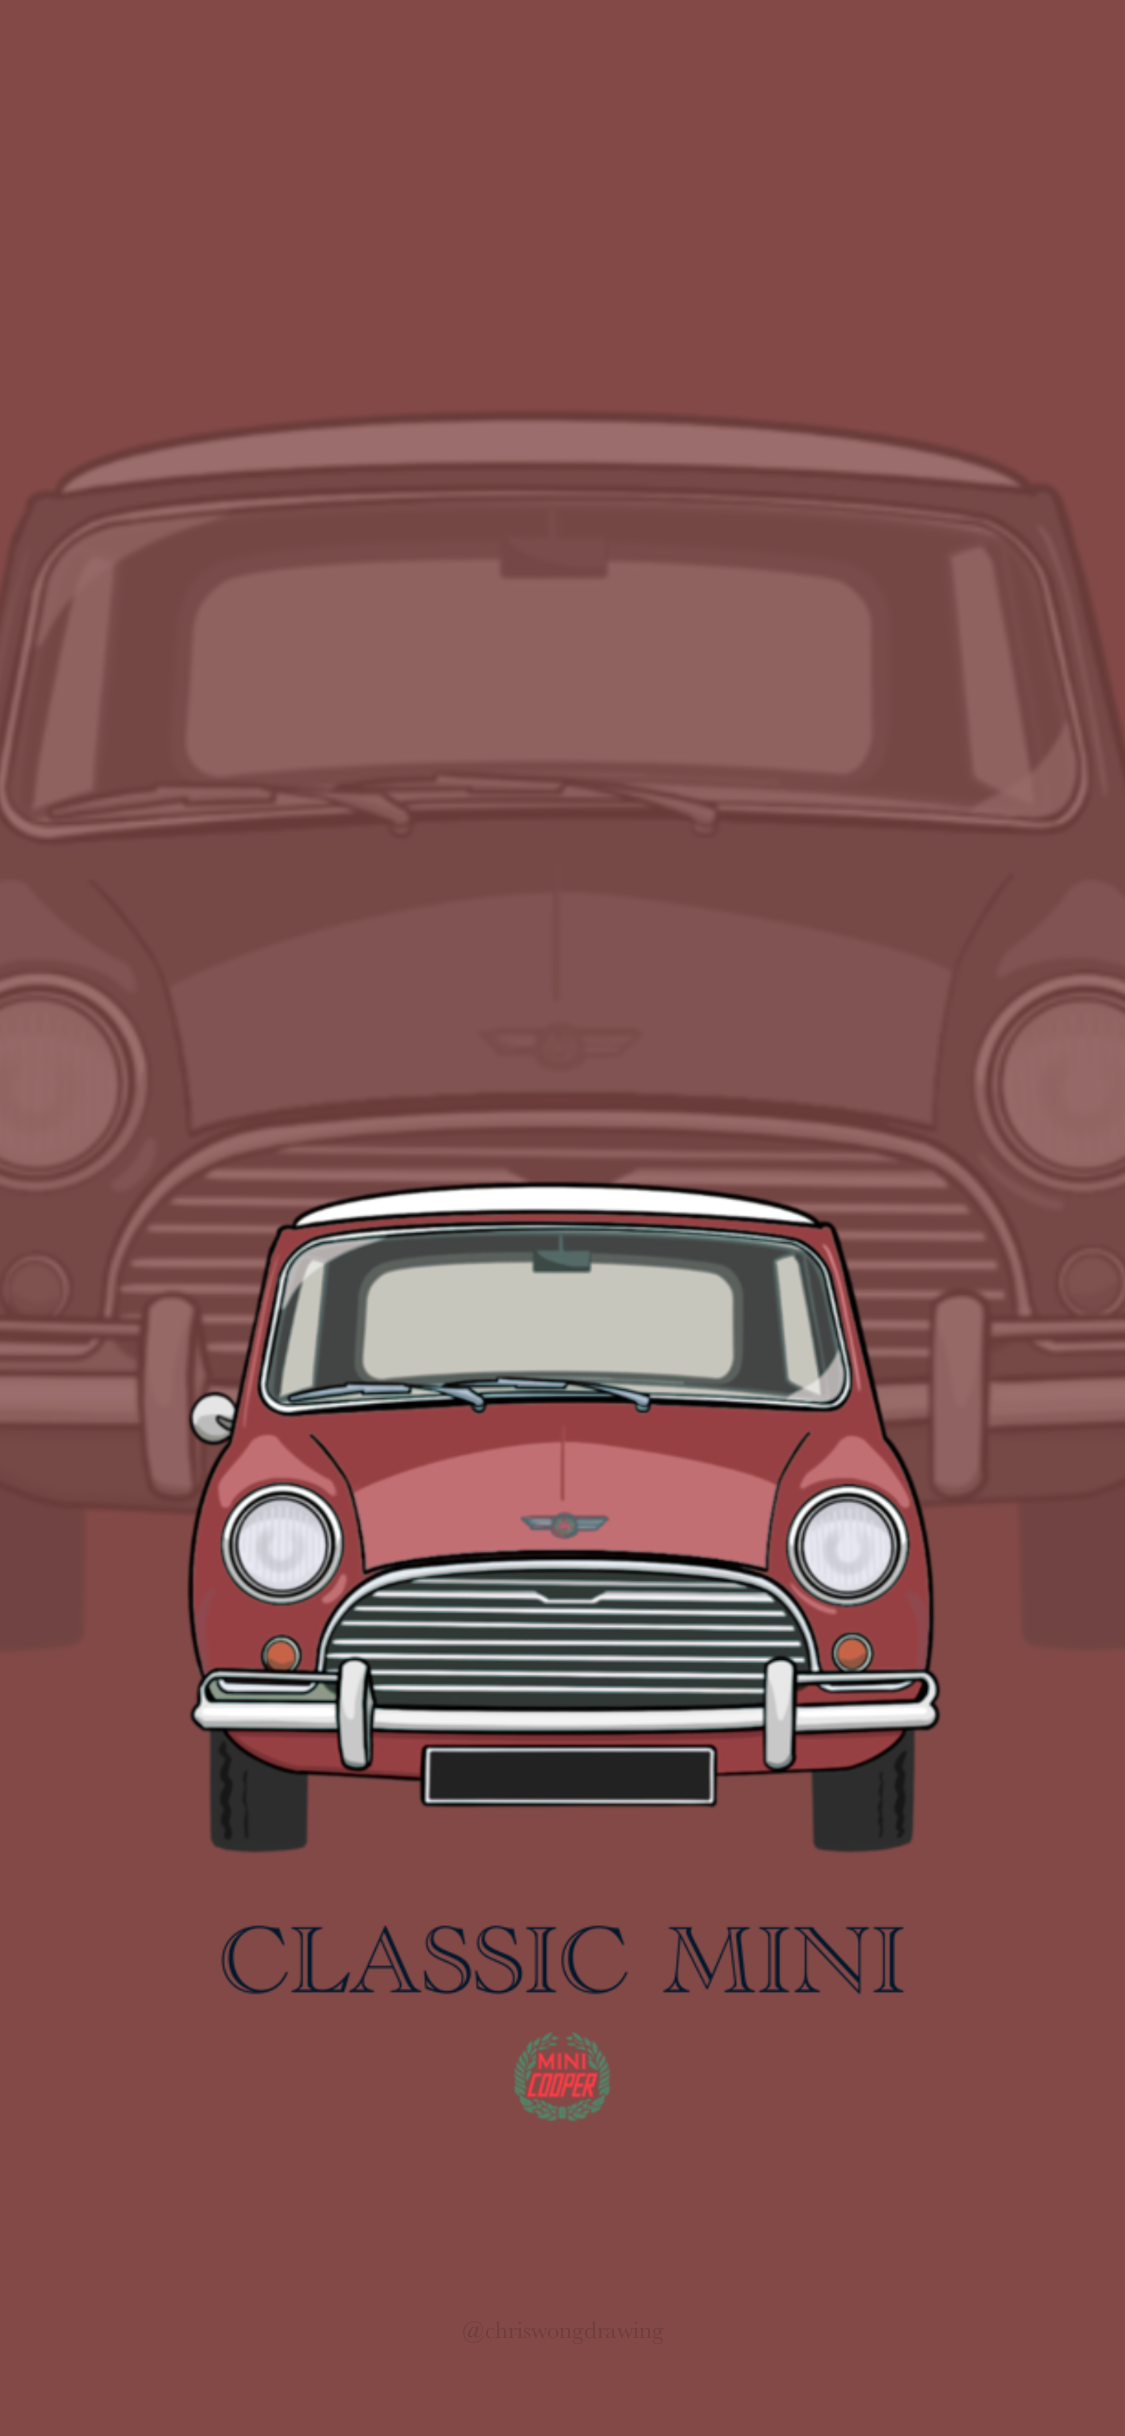 Classic Mini Cooper Iphone Wallpaper Red By Cwdrawing On Deviantart